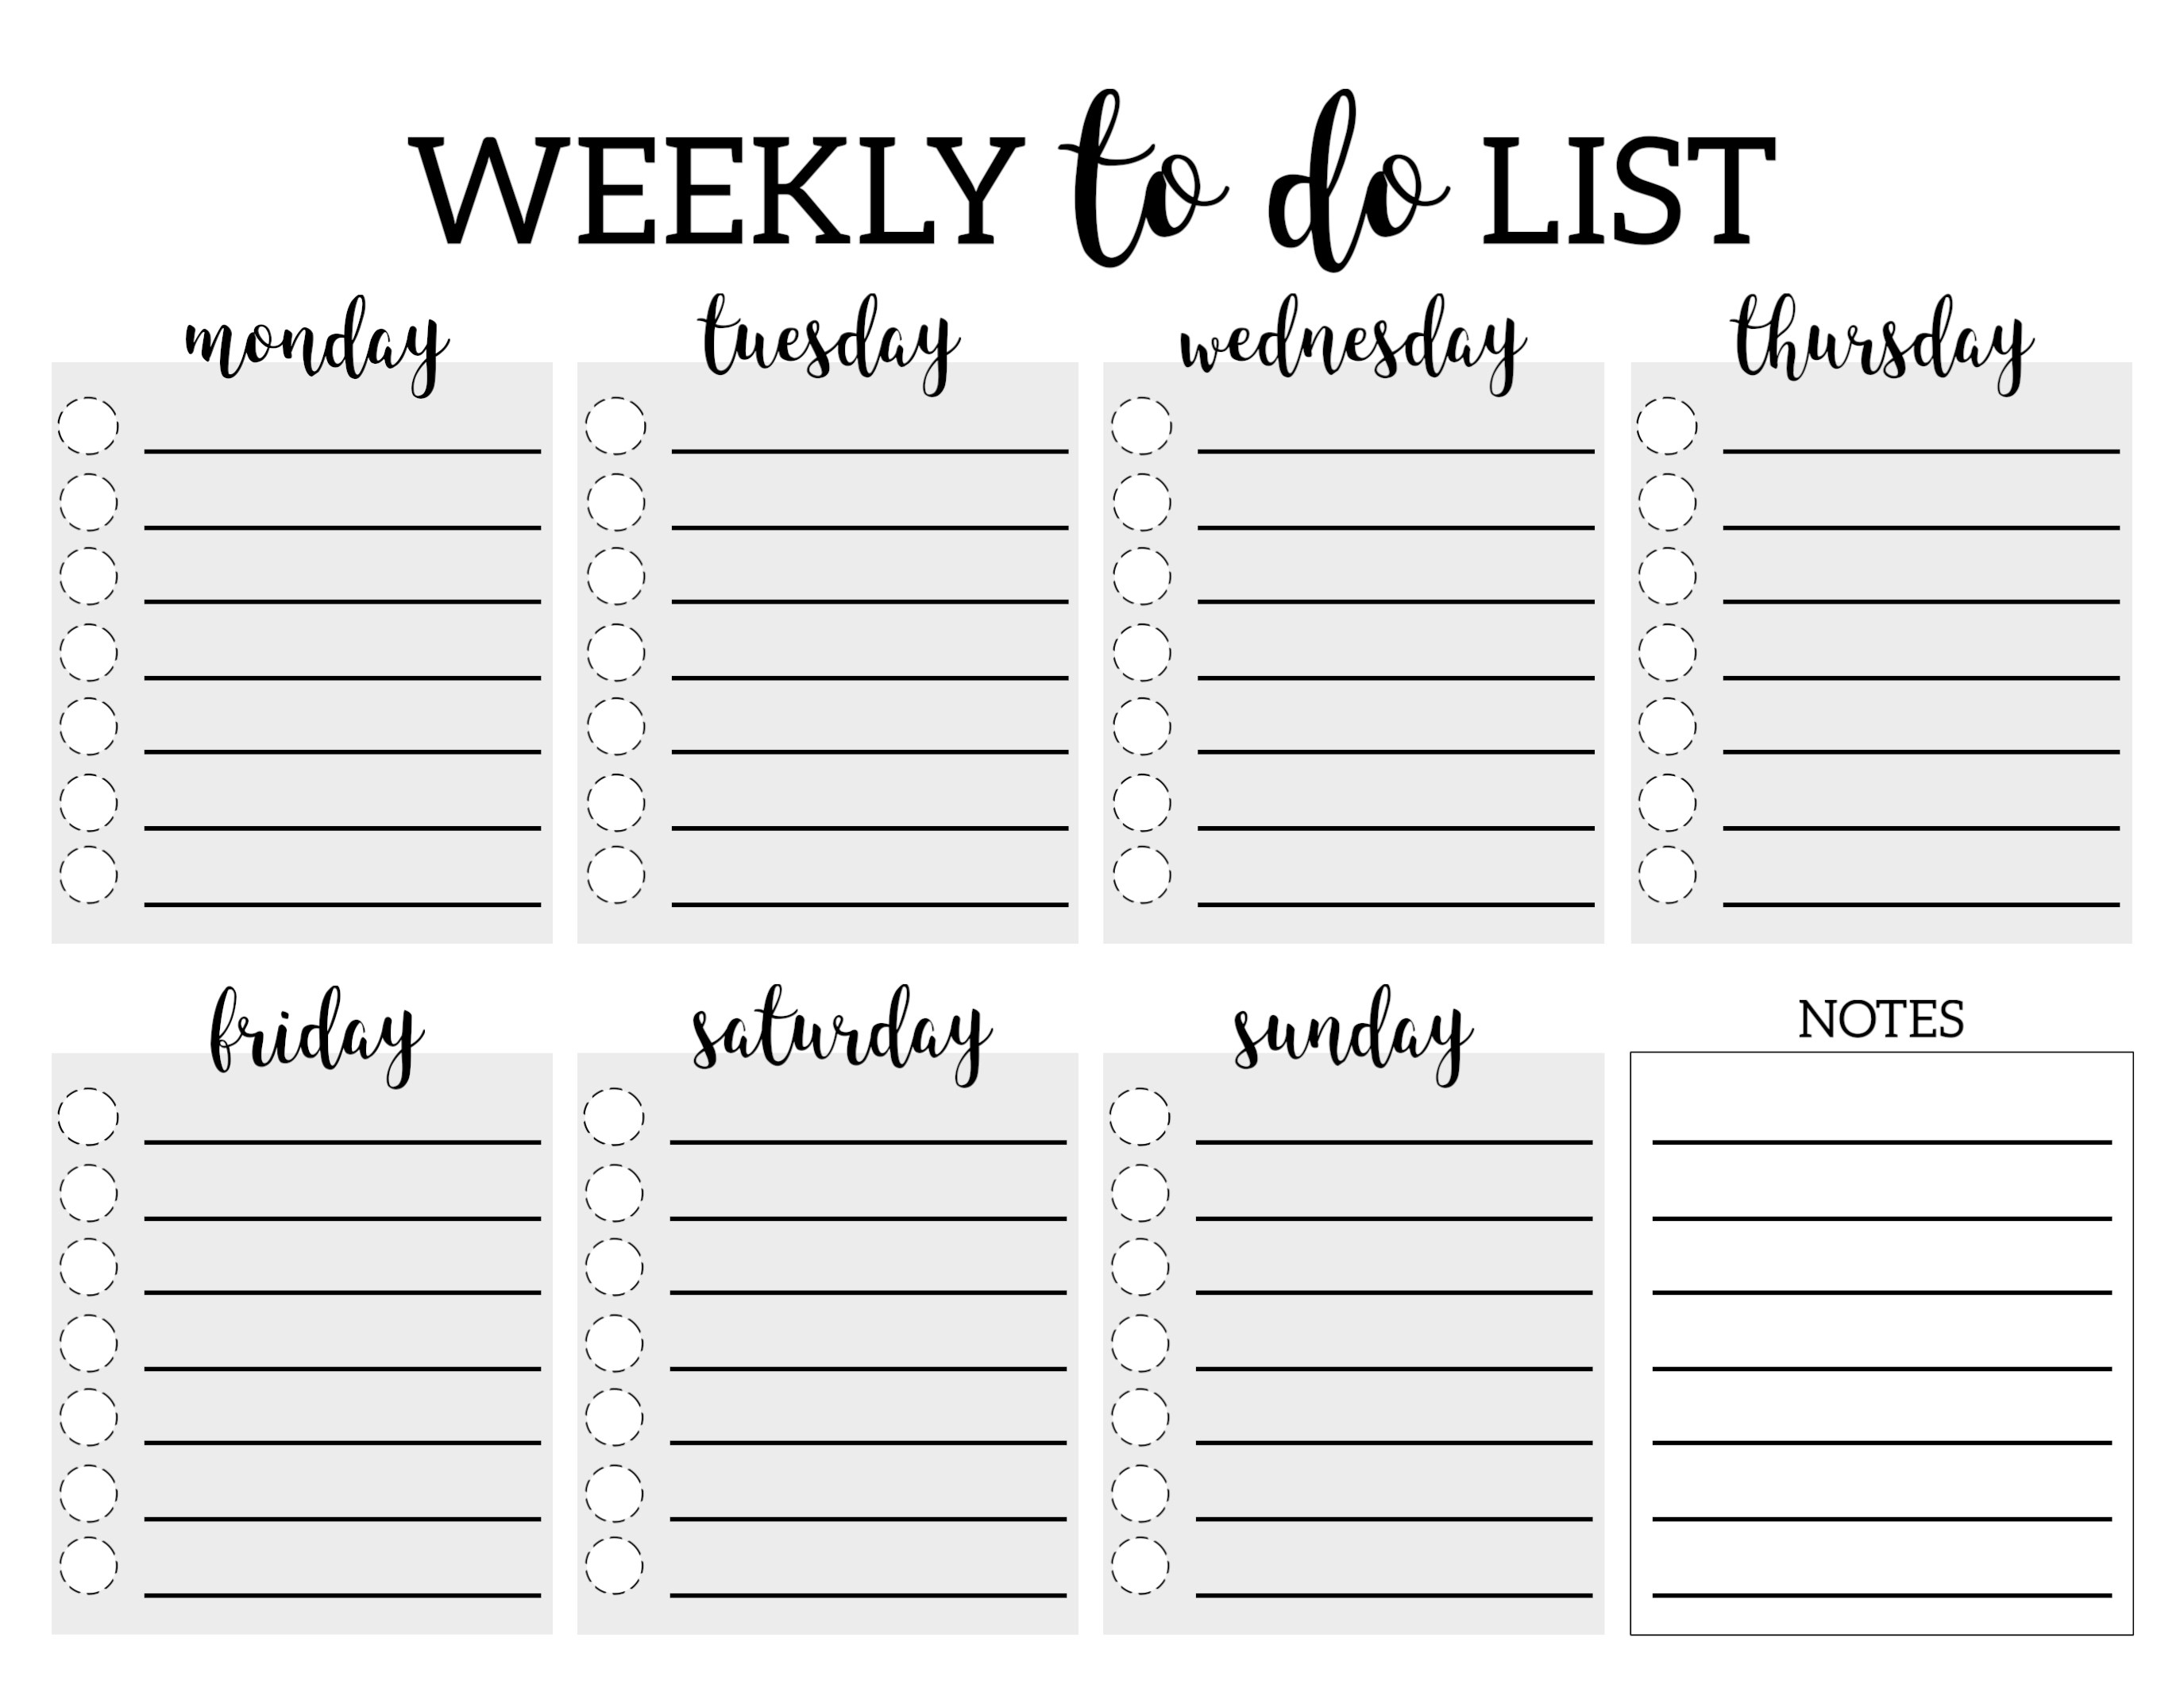 Weekly To Do List Printable Checklist Template - Paper Trail Design inside Free Printable Daily To Do Checklist Monday Through Friday